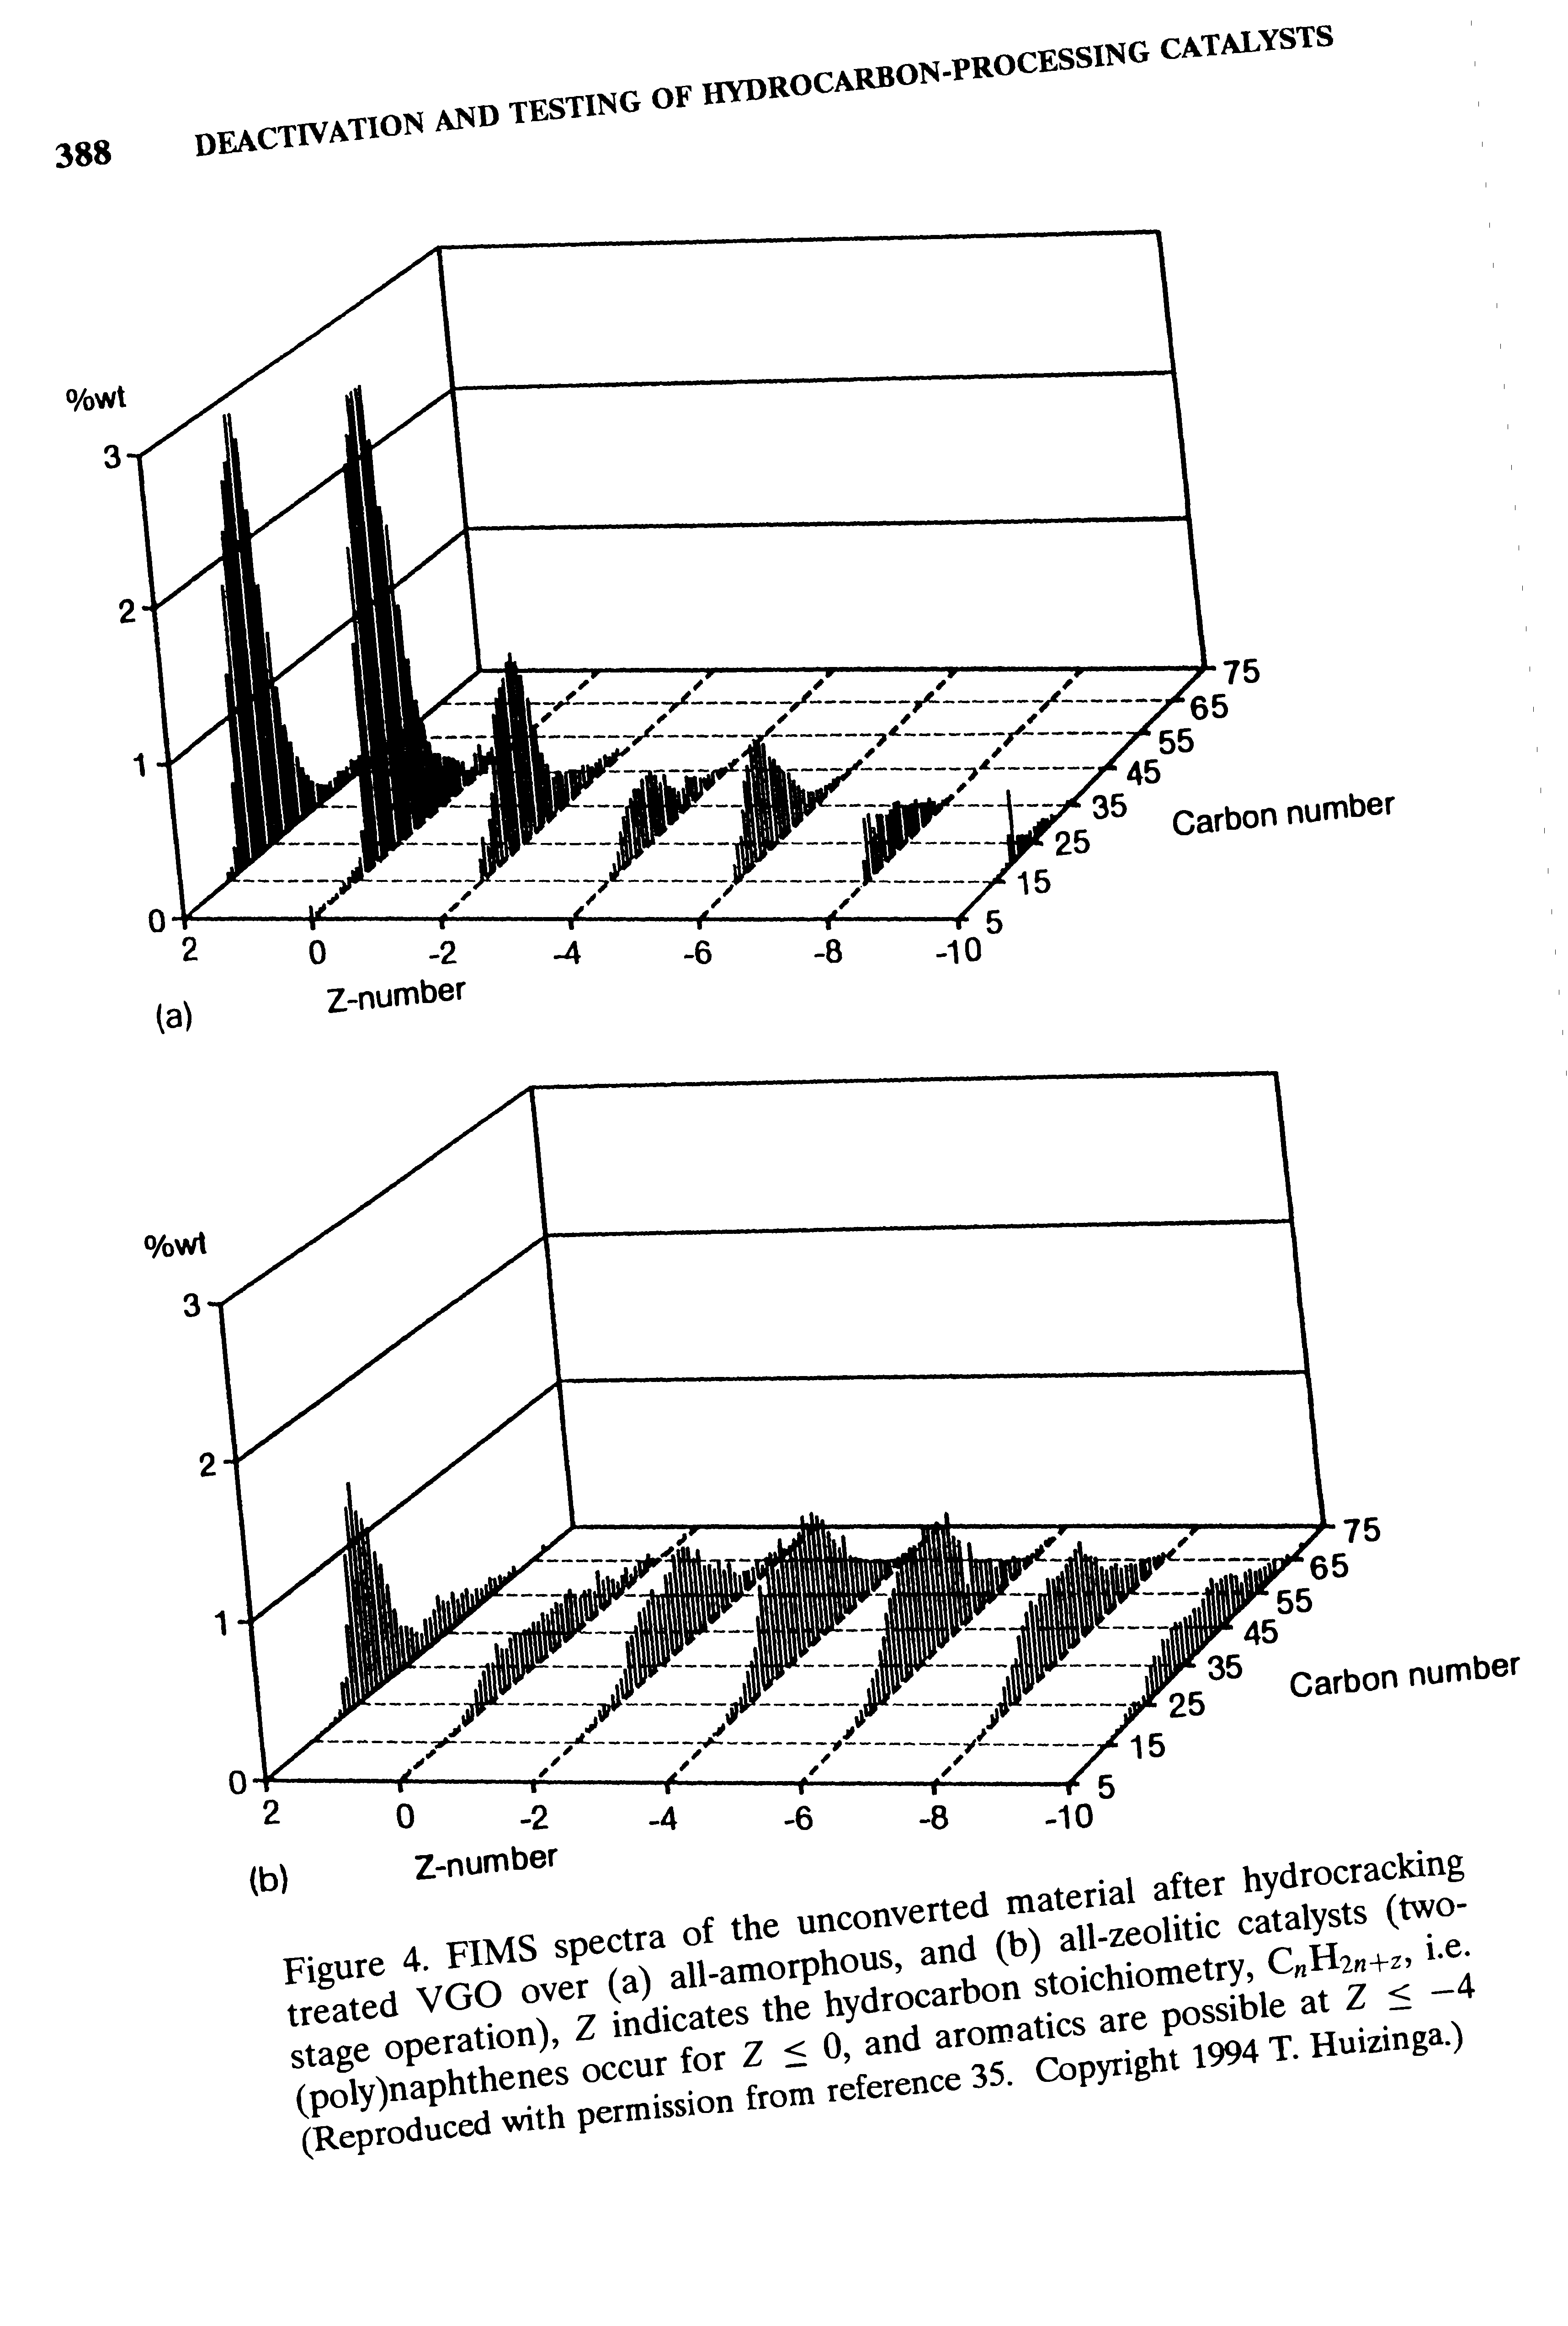 Figure 4. FIMS spectra of the unconverted material after hydrocracking treated VGO over (a) all-amorphous, and (b) all-zeolitic catalysts (two-stage operation), Z indicates the hydrocarbon stoichiometry, C H2w+z, (poly)naphthenes occur for Z < 0, and aromatics are possible at Z < —4 (Reproduced with permission from reference 35. Copyright 1994 T. Huizinga.)...